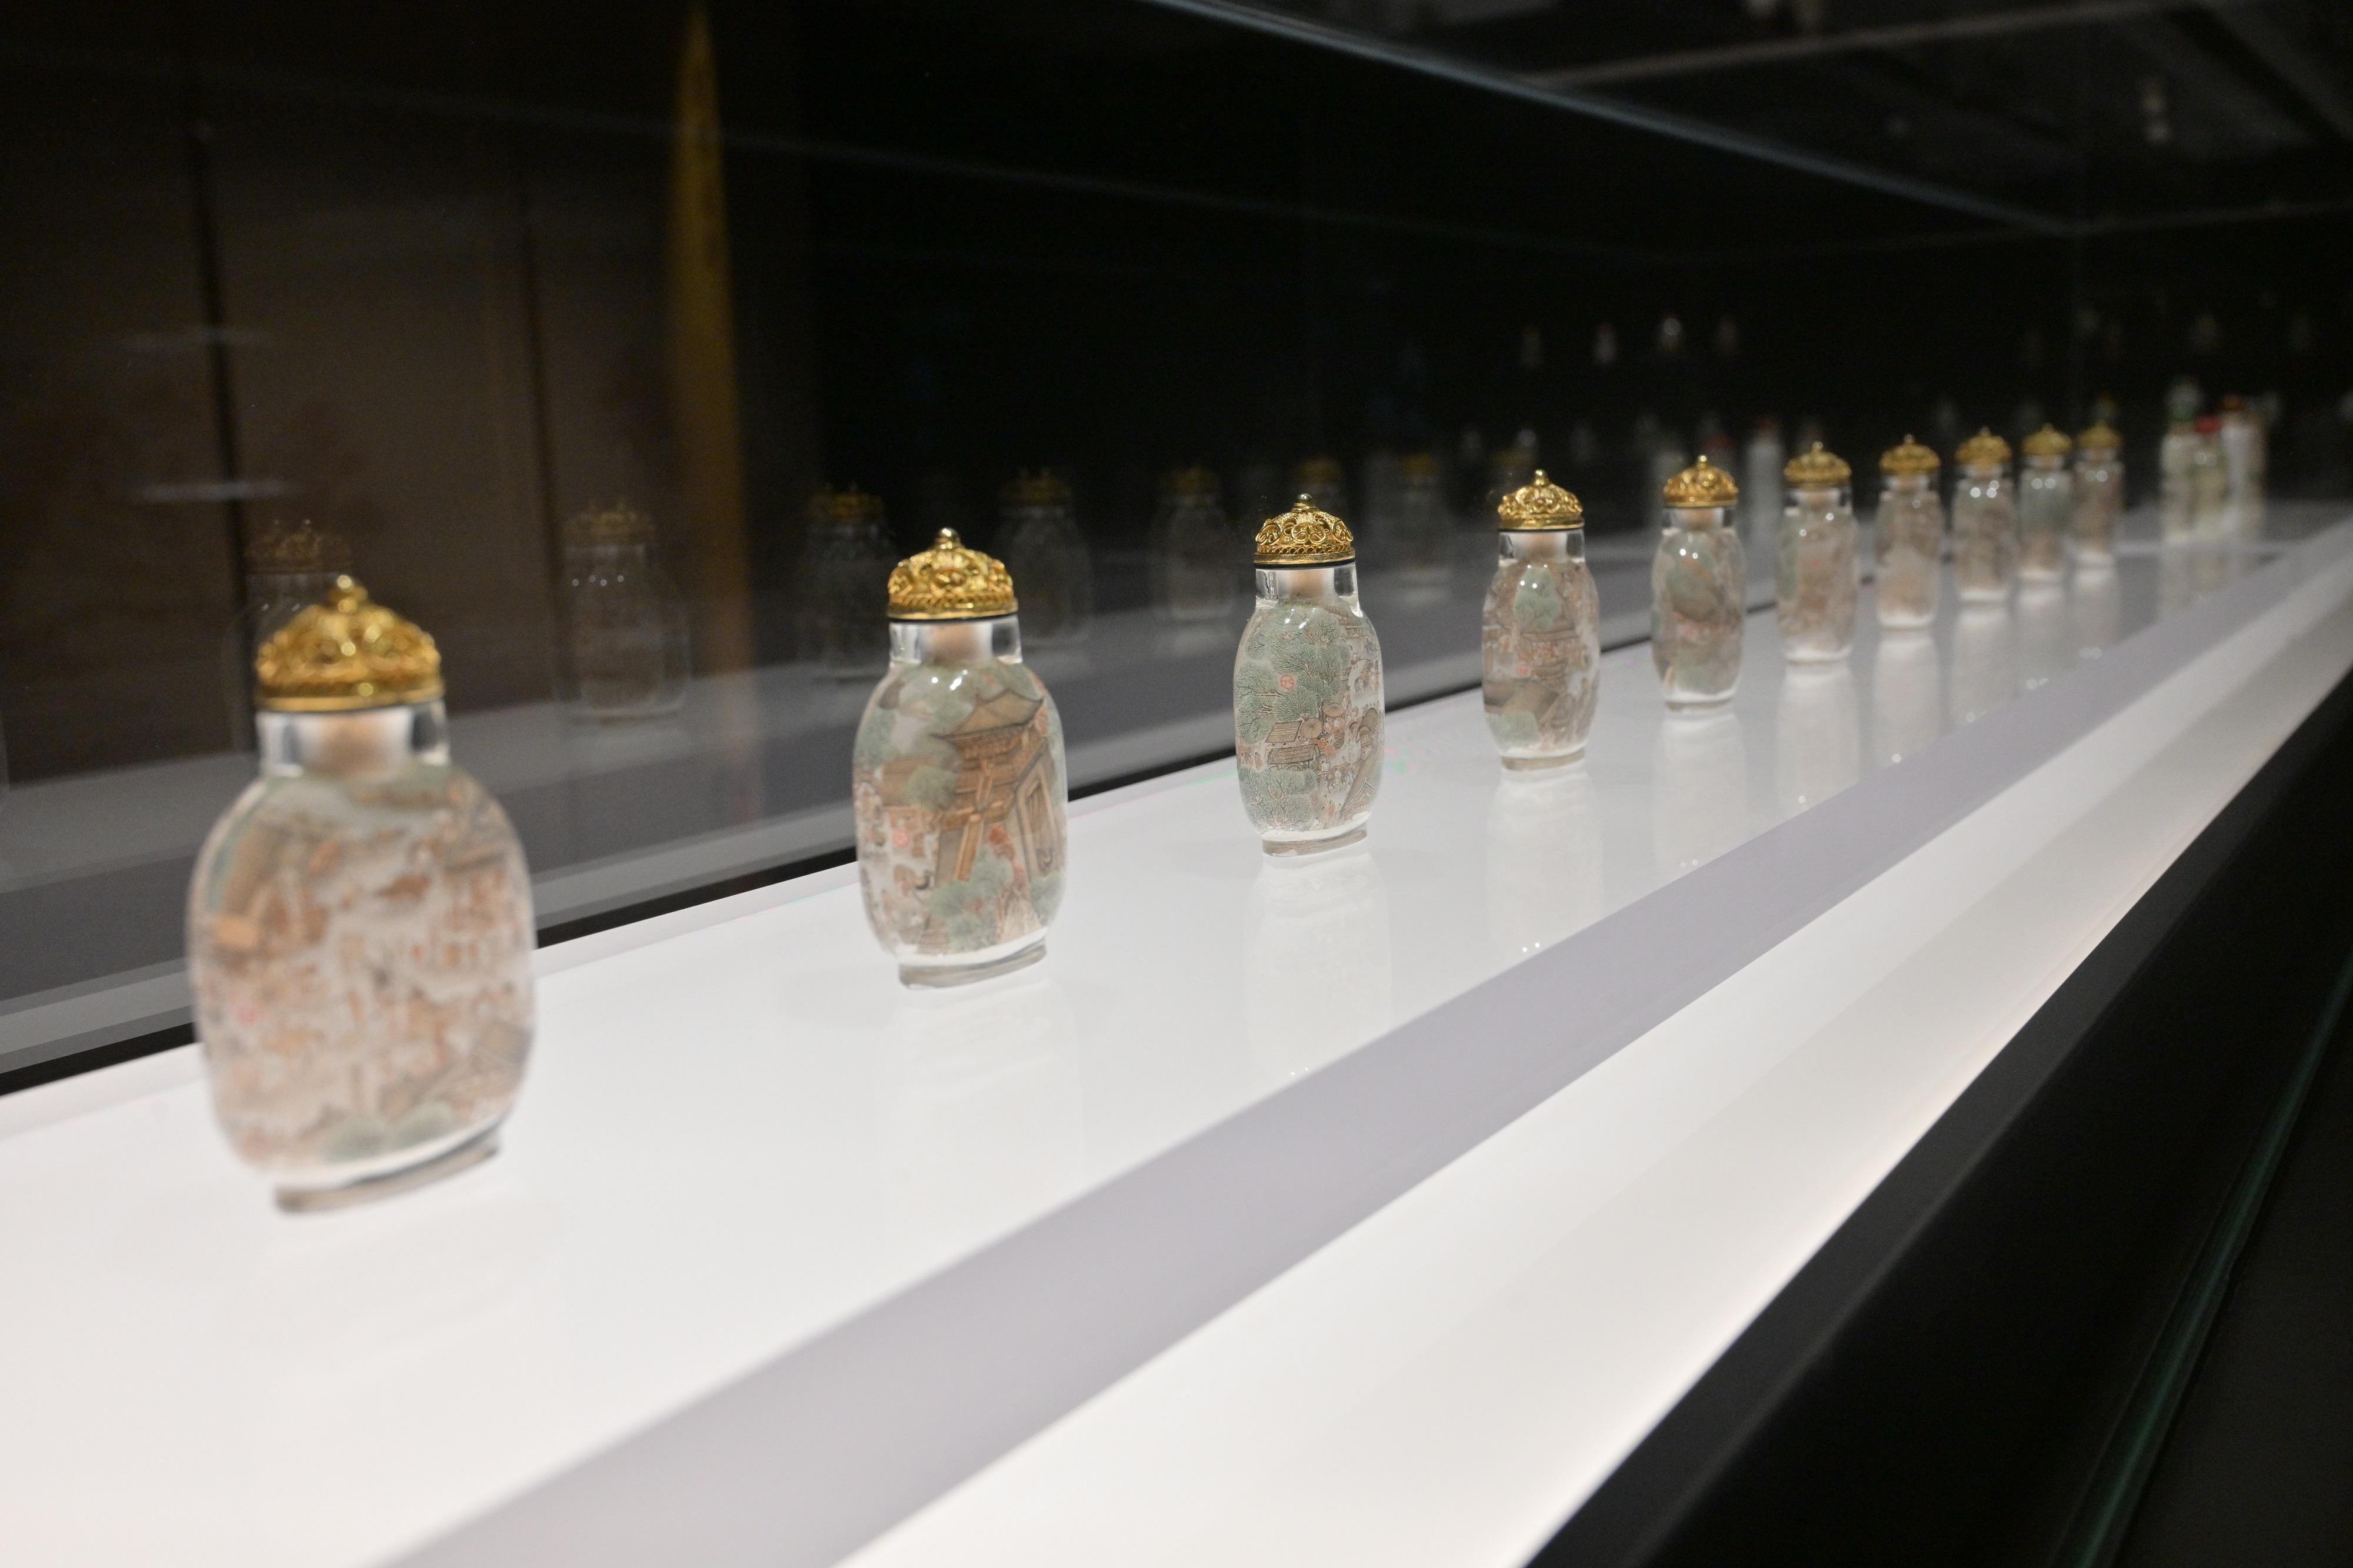 The opening ceremony of the "Art of Gifting: The Fuyun Xuan Collection of Chinese Snuff Bottles" exhibition and donation ceremony was held today (April 11) at the Hong Kong Museum of Art. Photo shows snuff bottles inside-painted with "Along the River during Qingming Festival".
